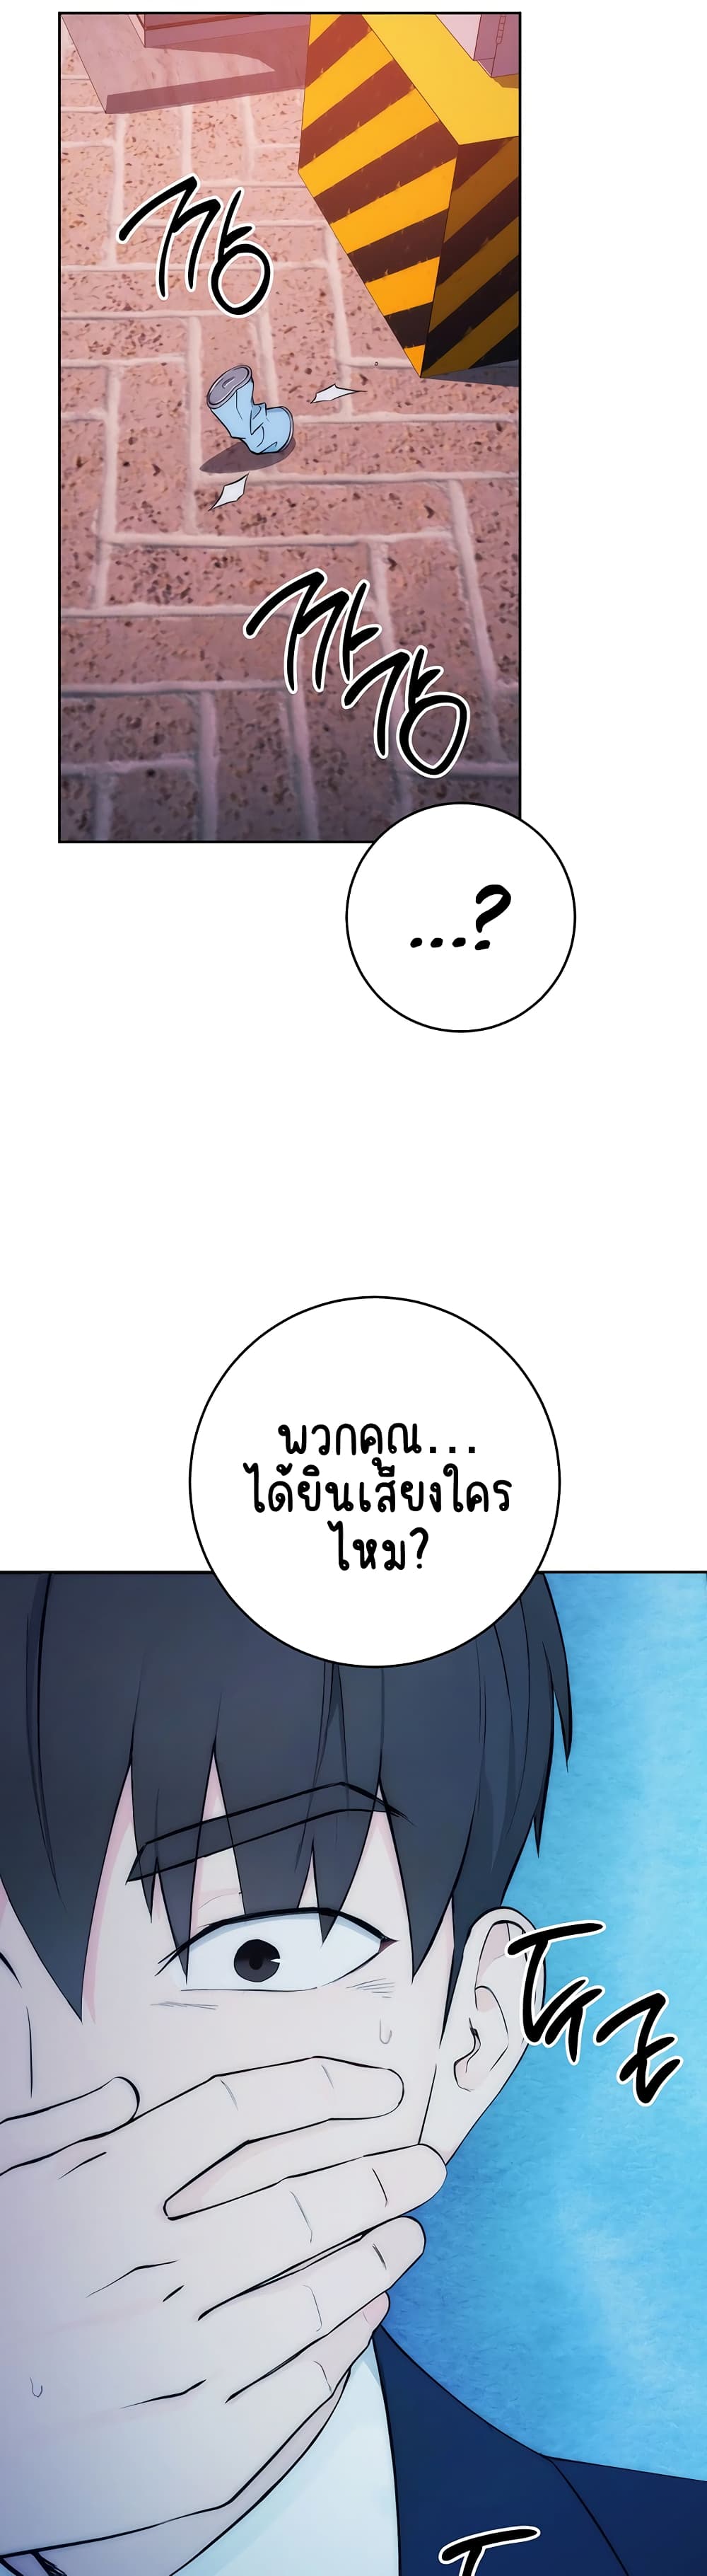 Outsider: The Invisible Man ตอนที่ 1 ภาพ 64